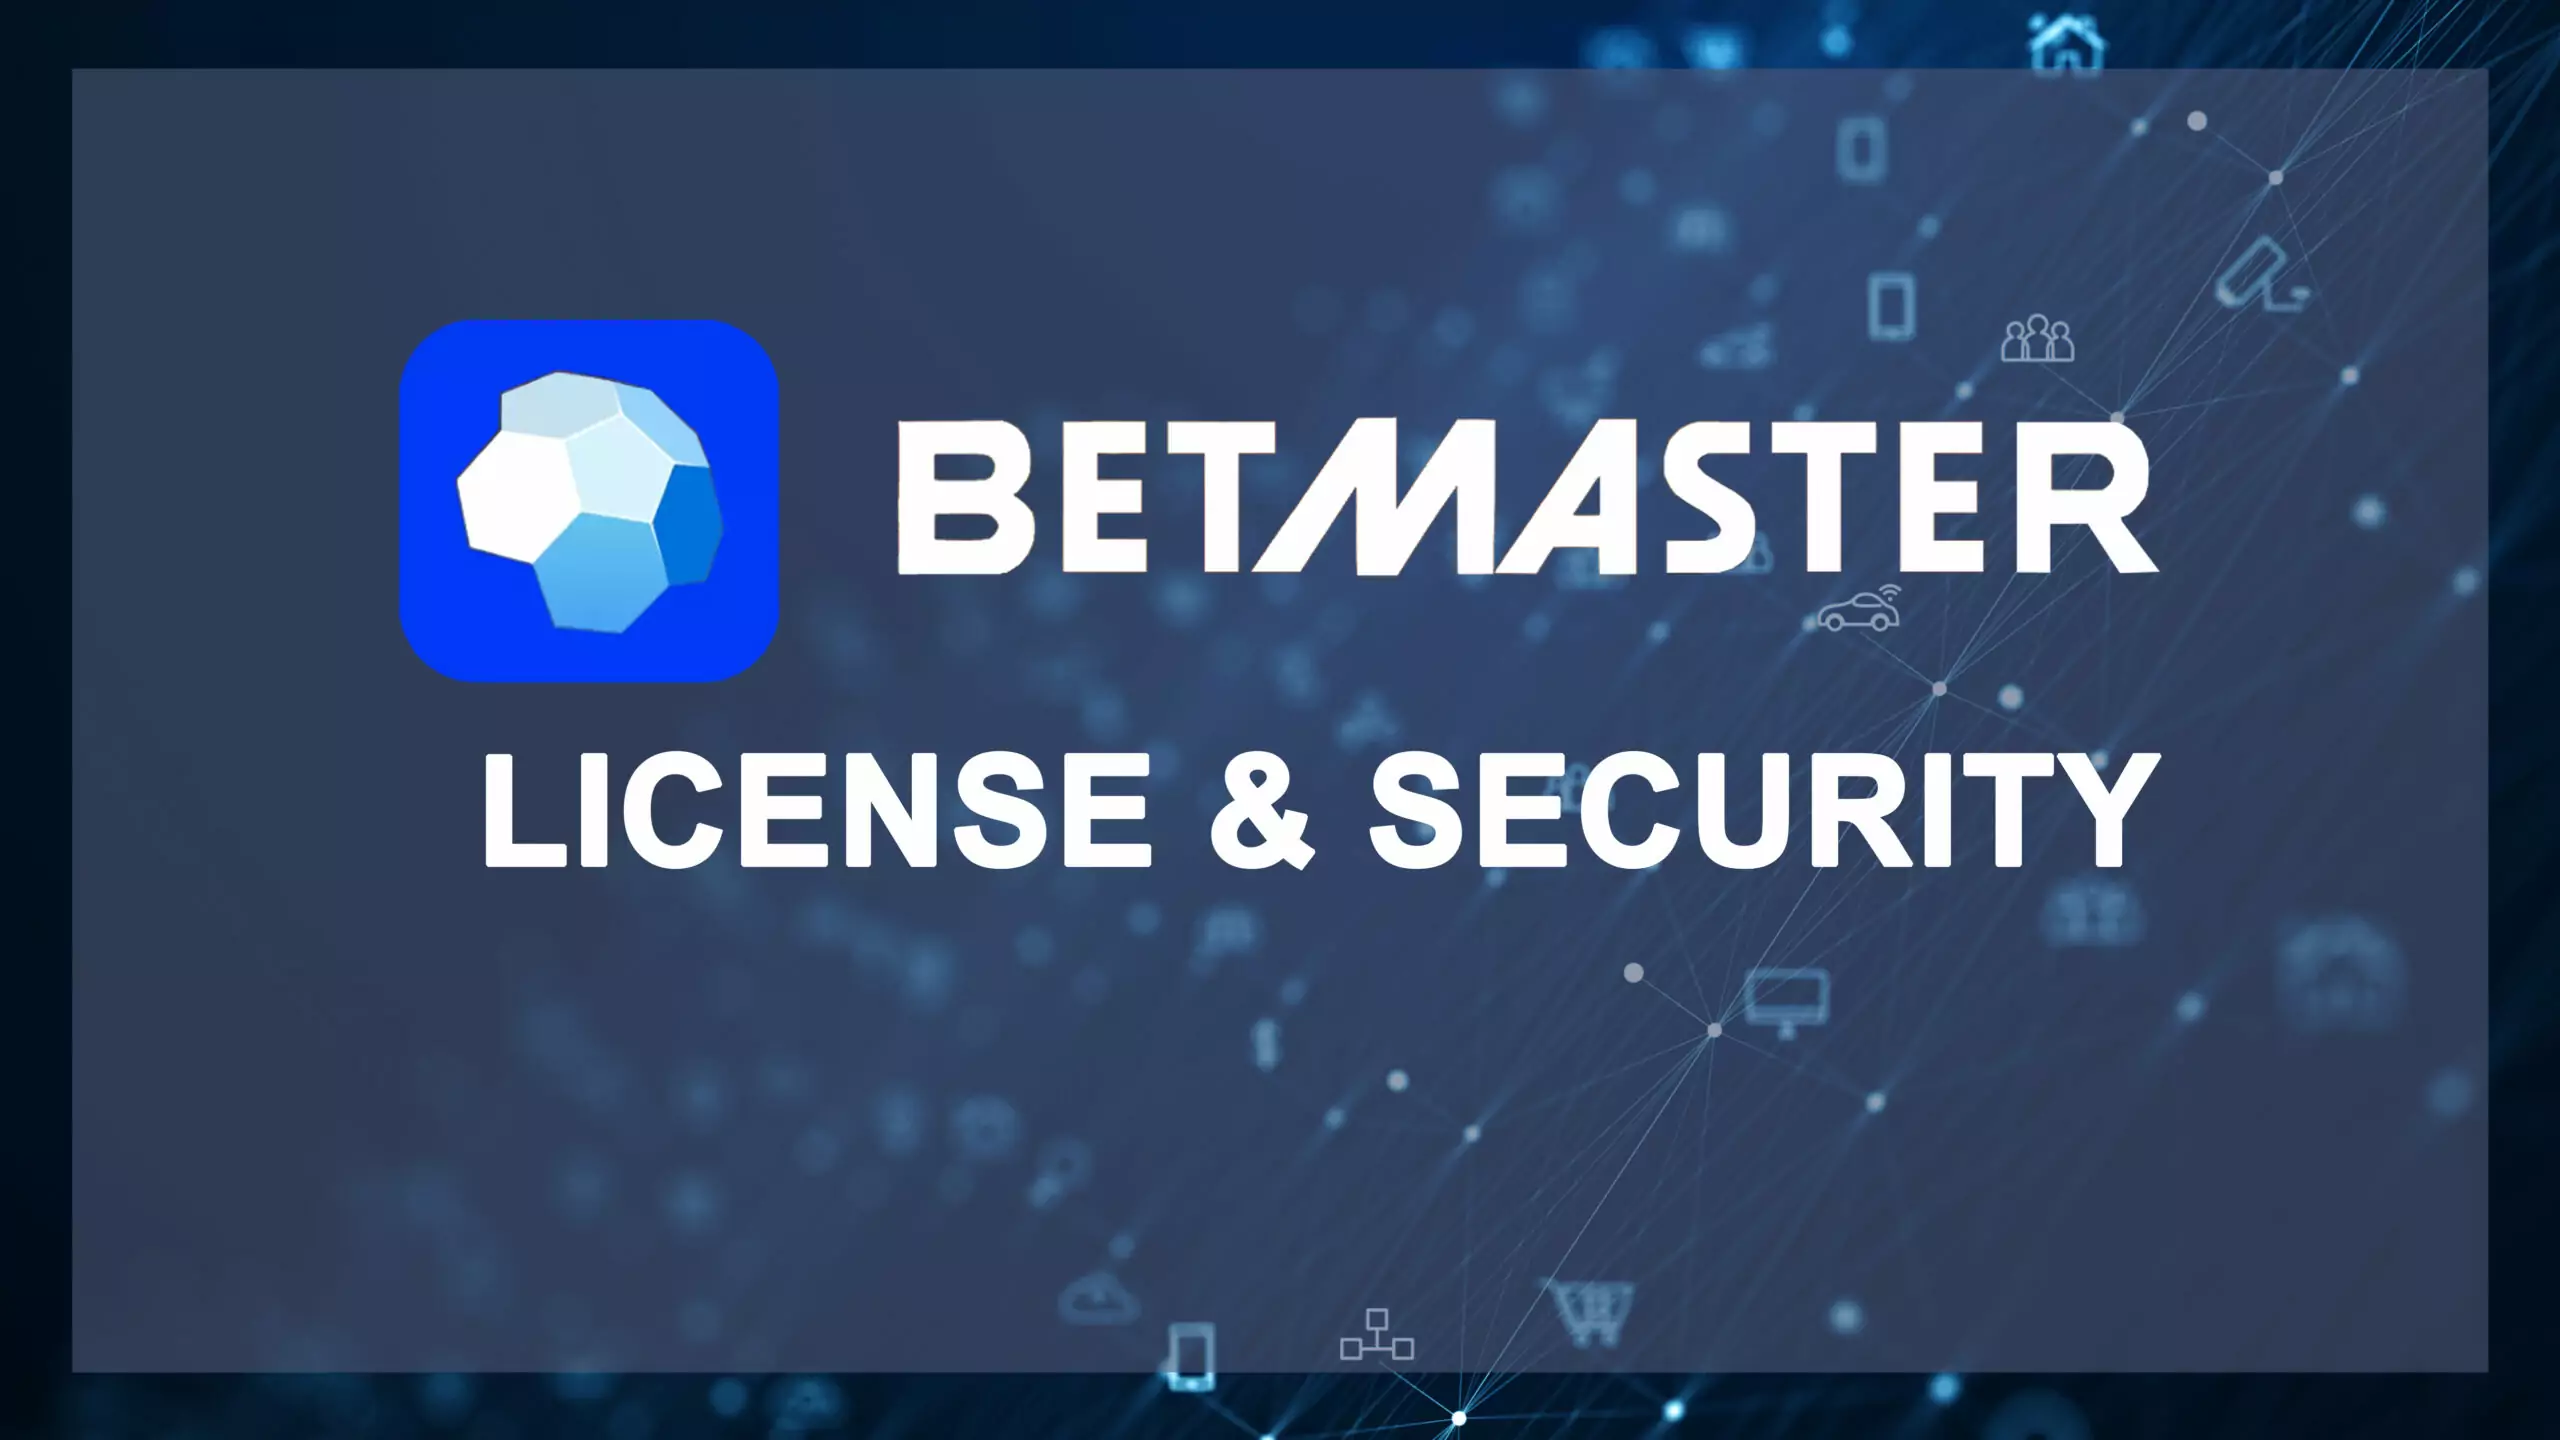 Betmaster is a secure and legal service for betting and playing in India.